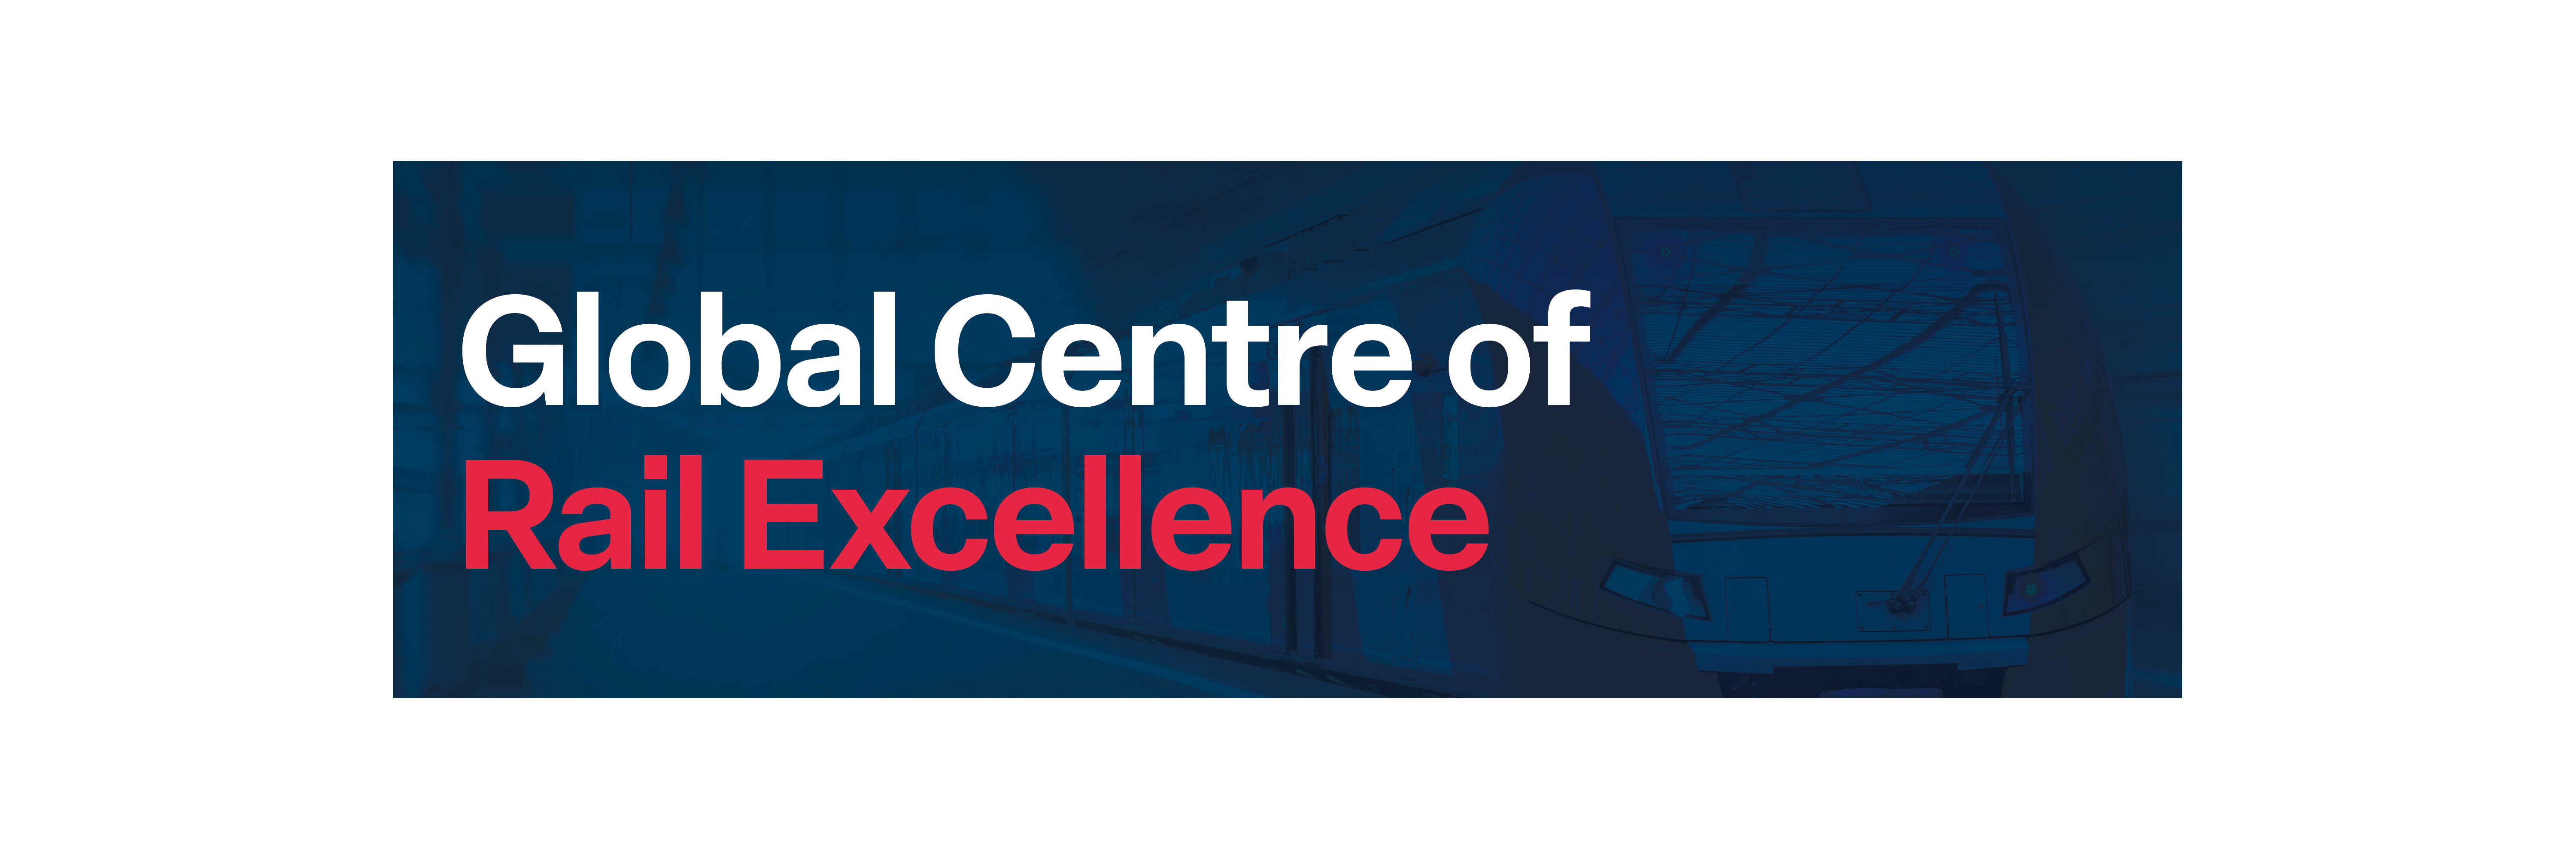 Global Centre of Rail Excellence